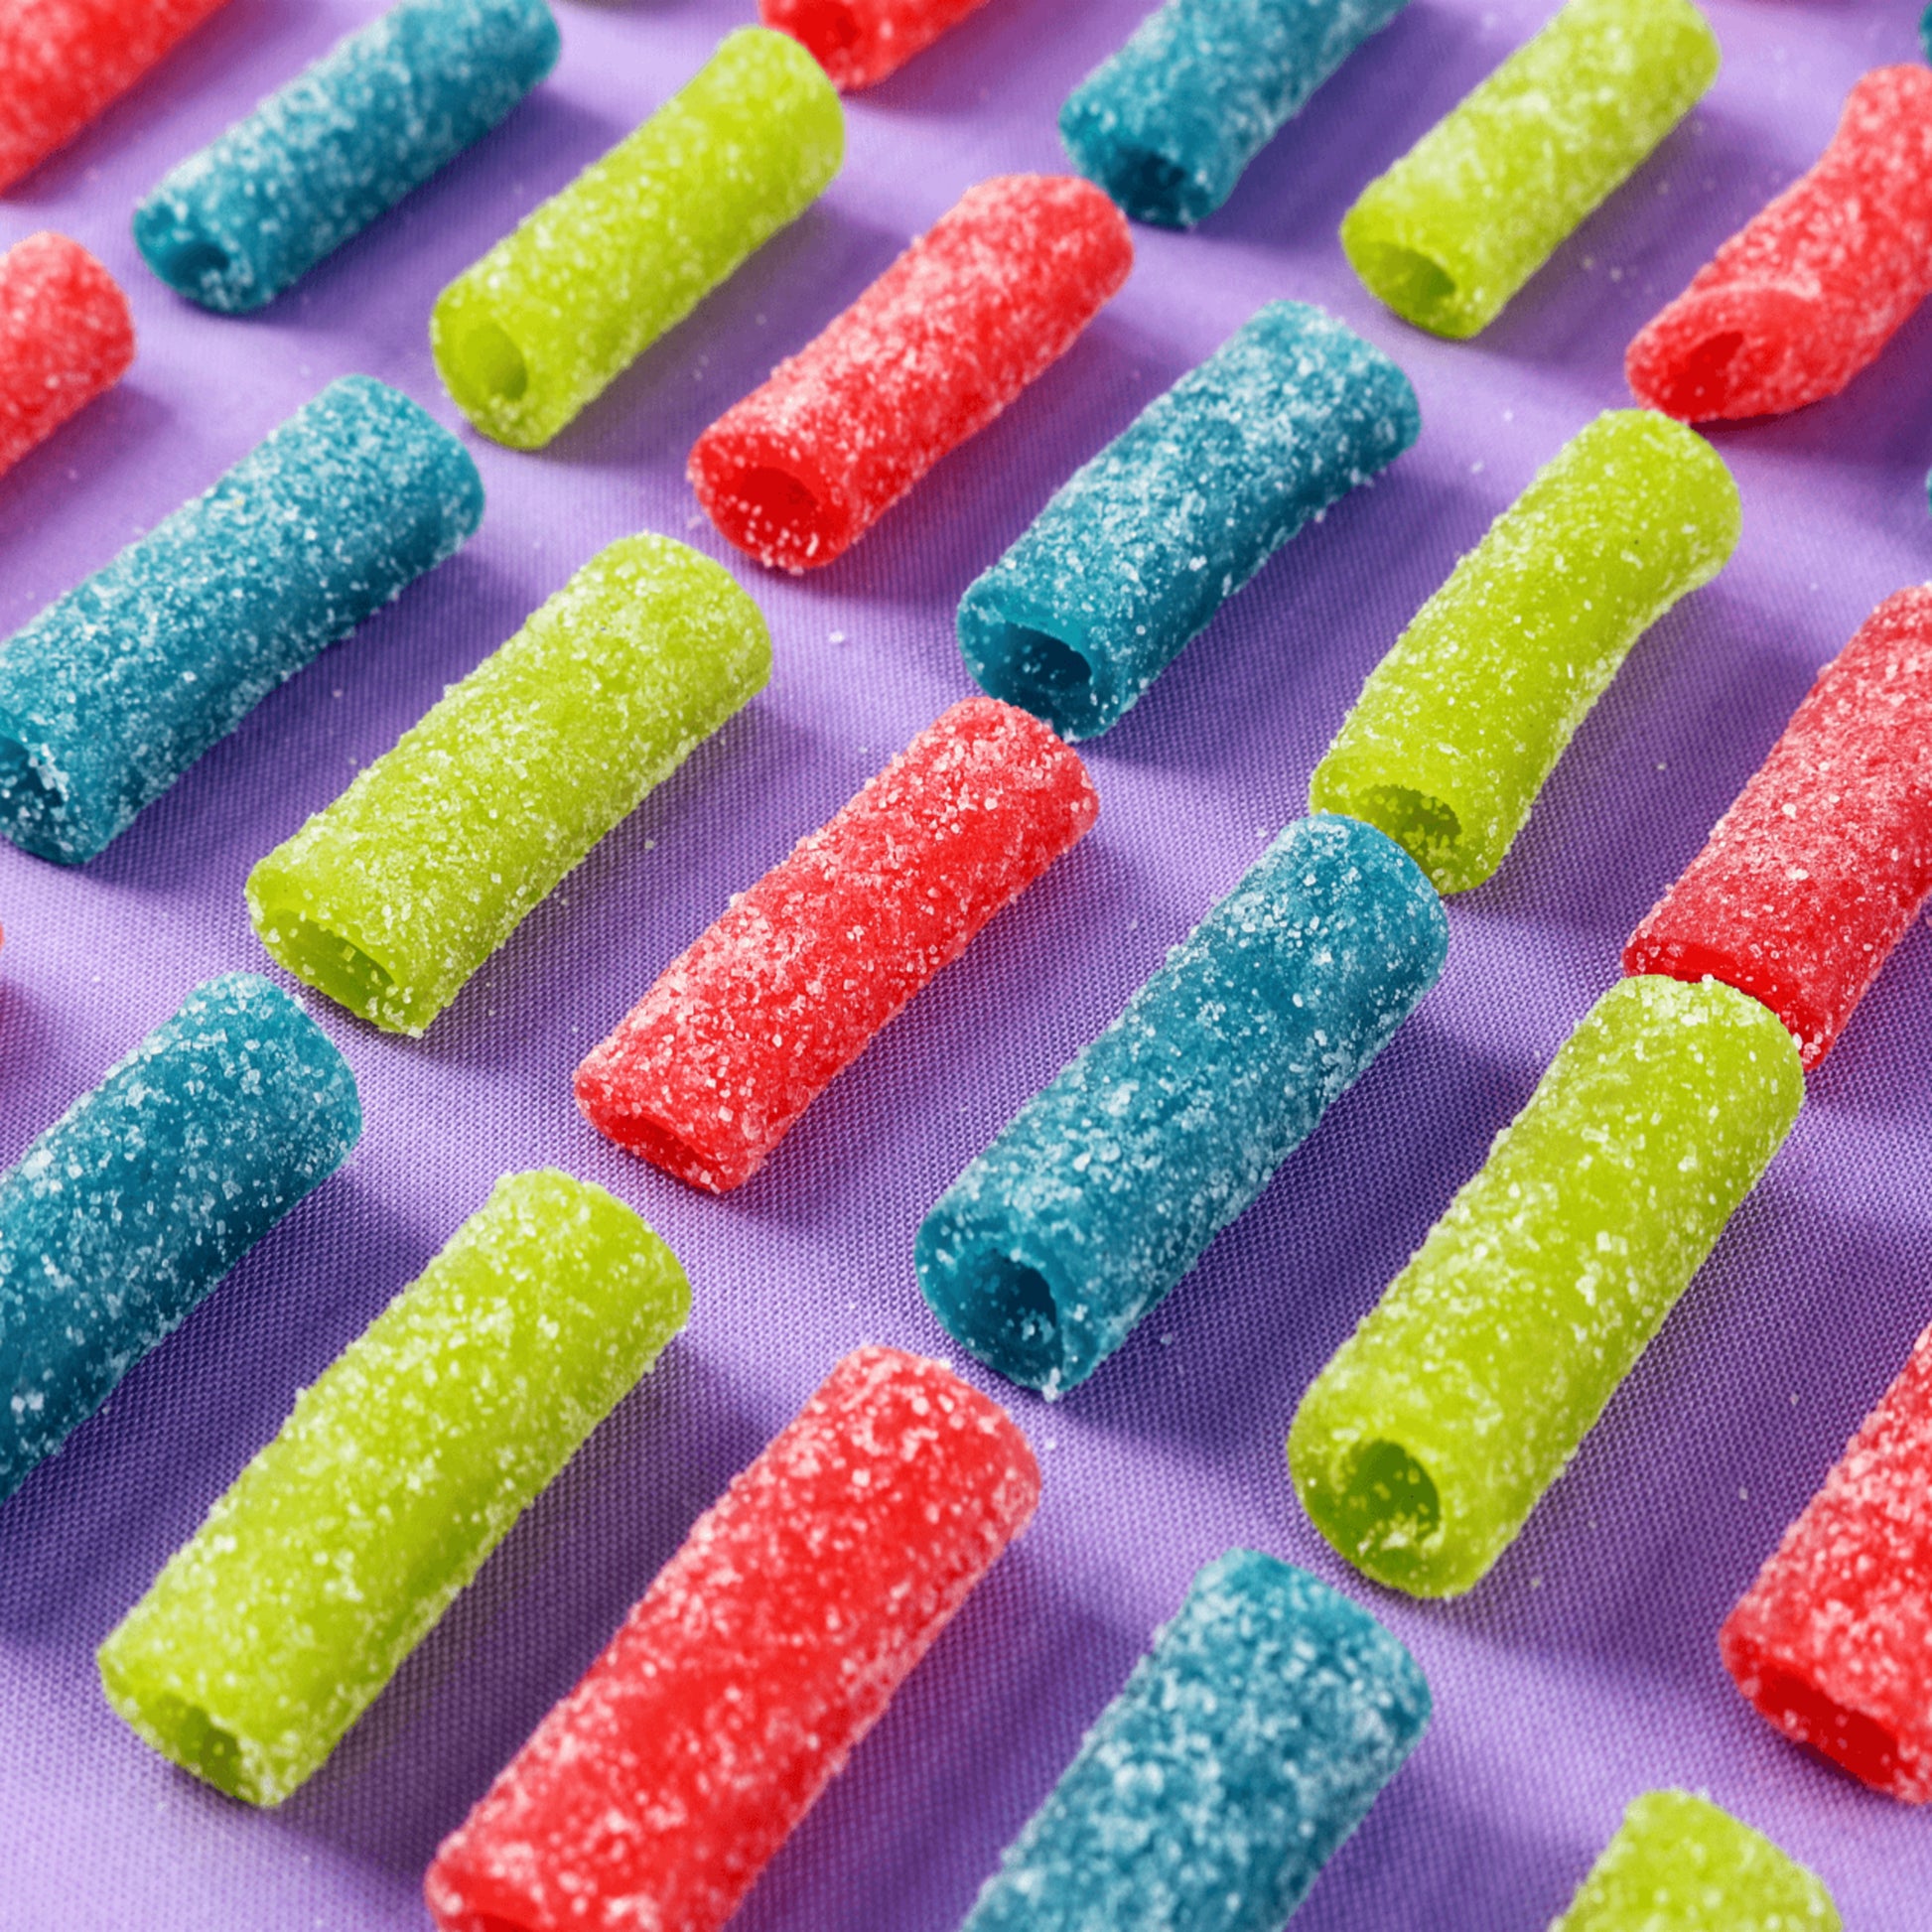 Sour Punch Bites Raw Candy on Purple Background - Assorted Sour Candy - Sour Punch Straw Bites